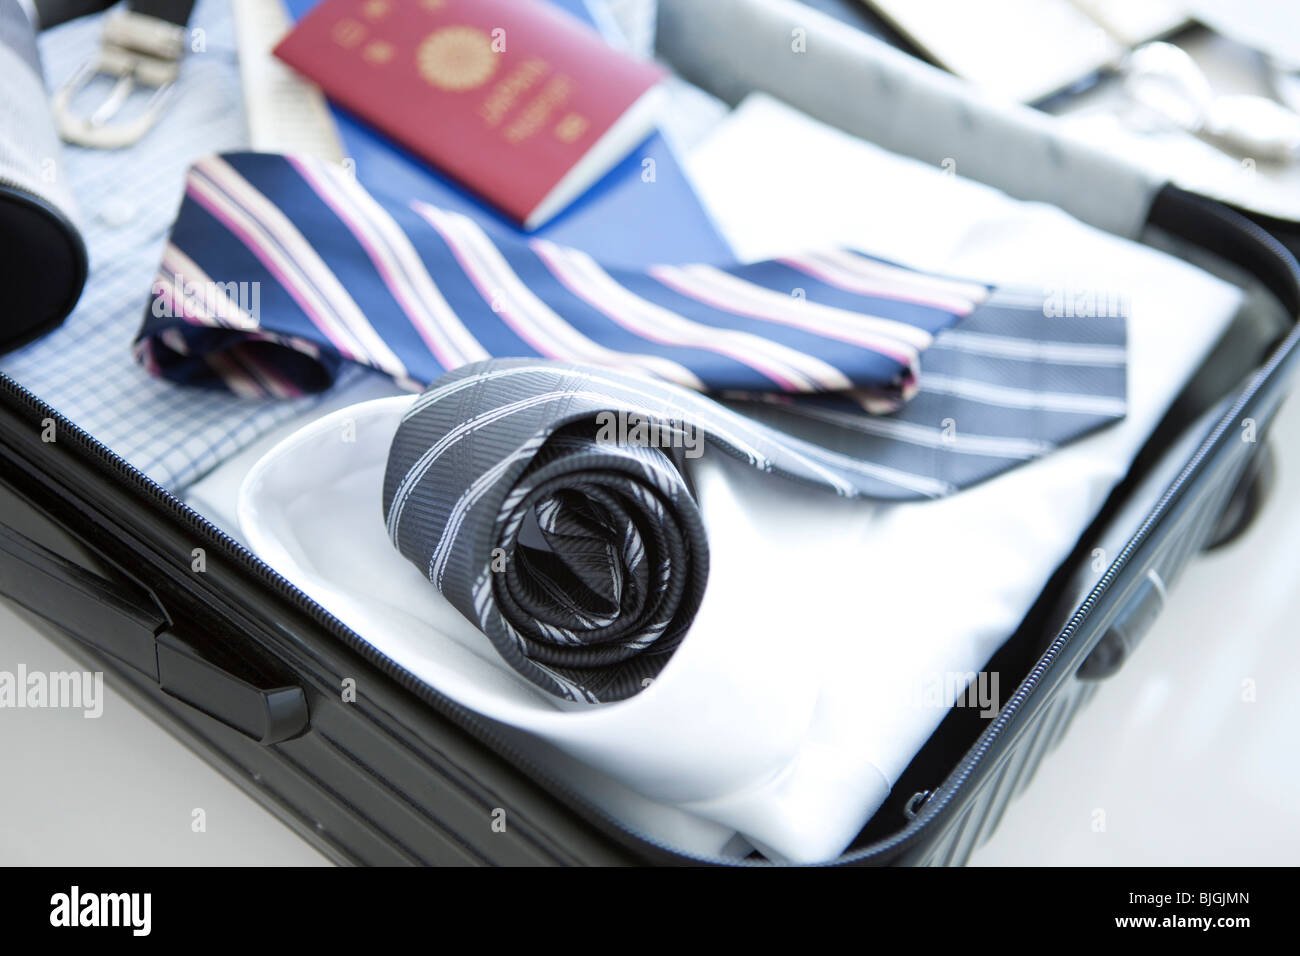 Packed suitcase lying open Stock Photo